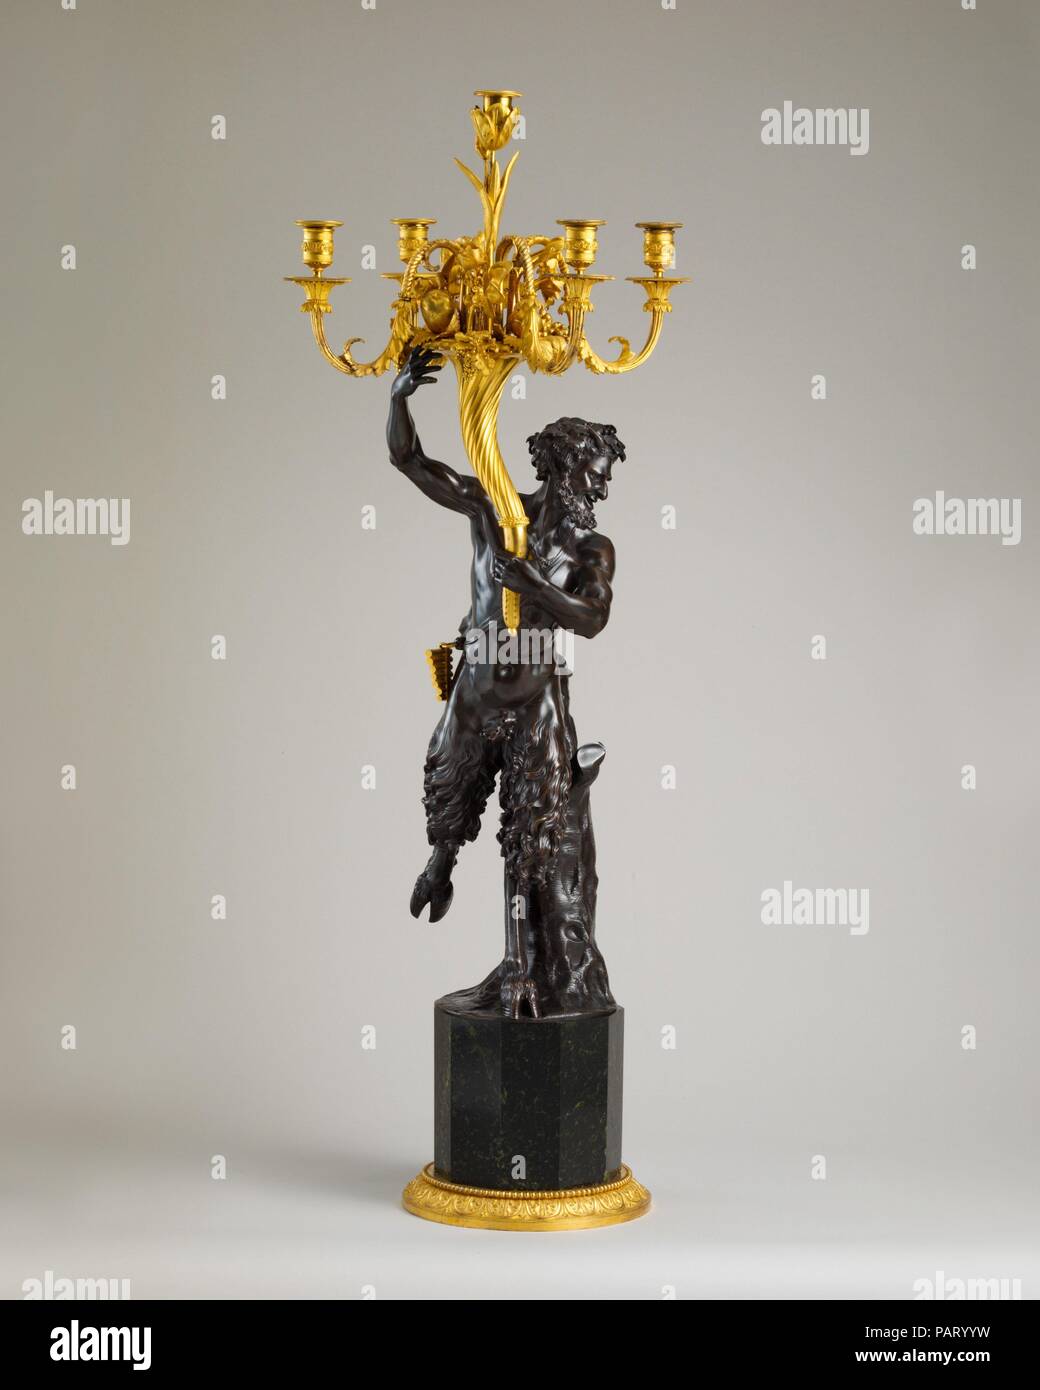 Five-light candelabrum (one of a pair). Culture: French. Dimensions: H. 45 3/8 x W. 13 1/2 x D. 17 1/2in. (115.3 x 34.3 x 44.5cm). Modeler: Derived from a model by Clodion (Claude Michel) (French, Nancy 1738-1814 Paris). Date: ca. 1785. Museum: Metropolitan Museum of Art, New York, USA. Stock Photo